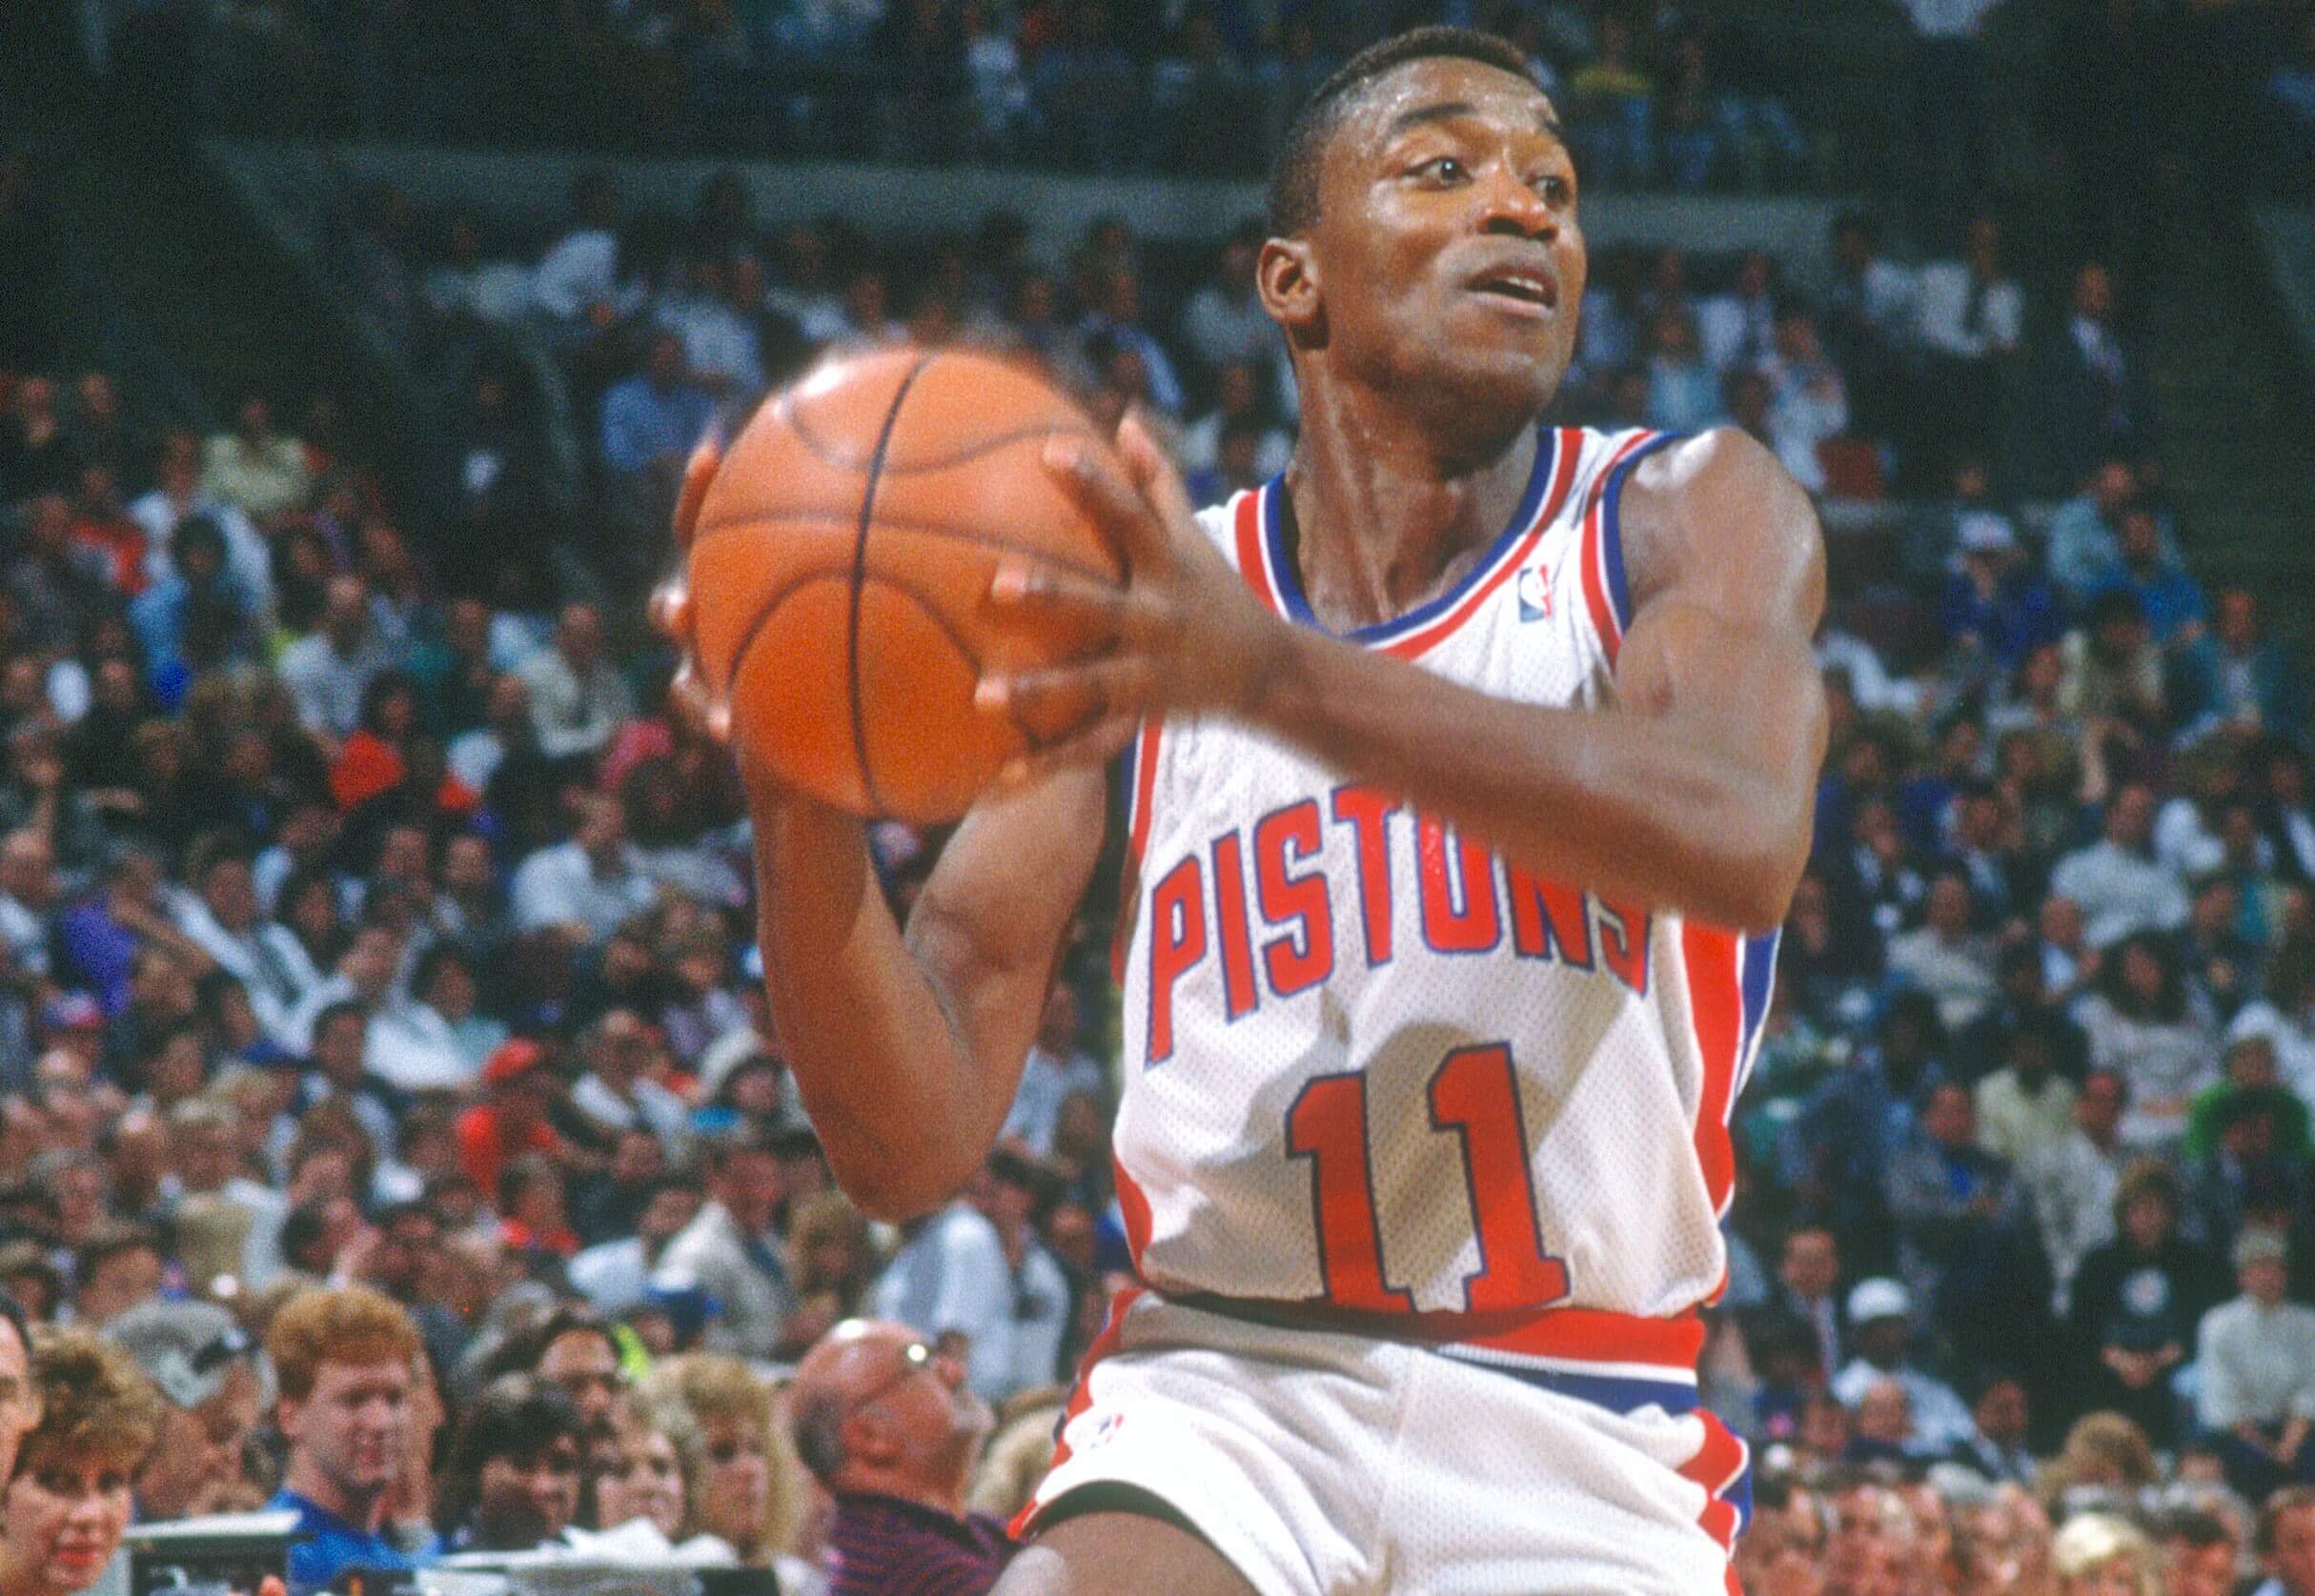 Isiah Thomas of the Detroit Pistons looks to pass the ball.